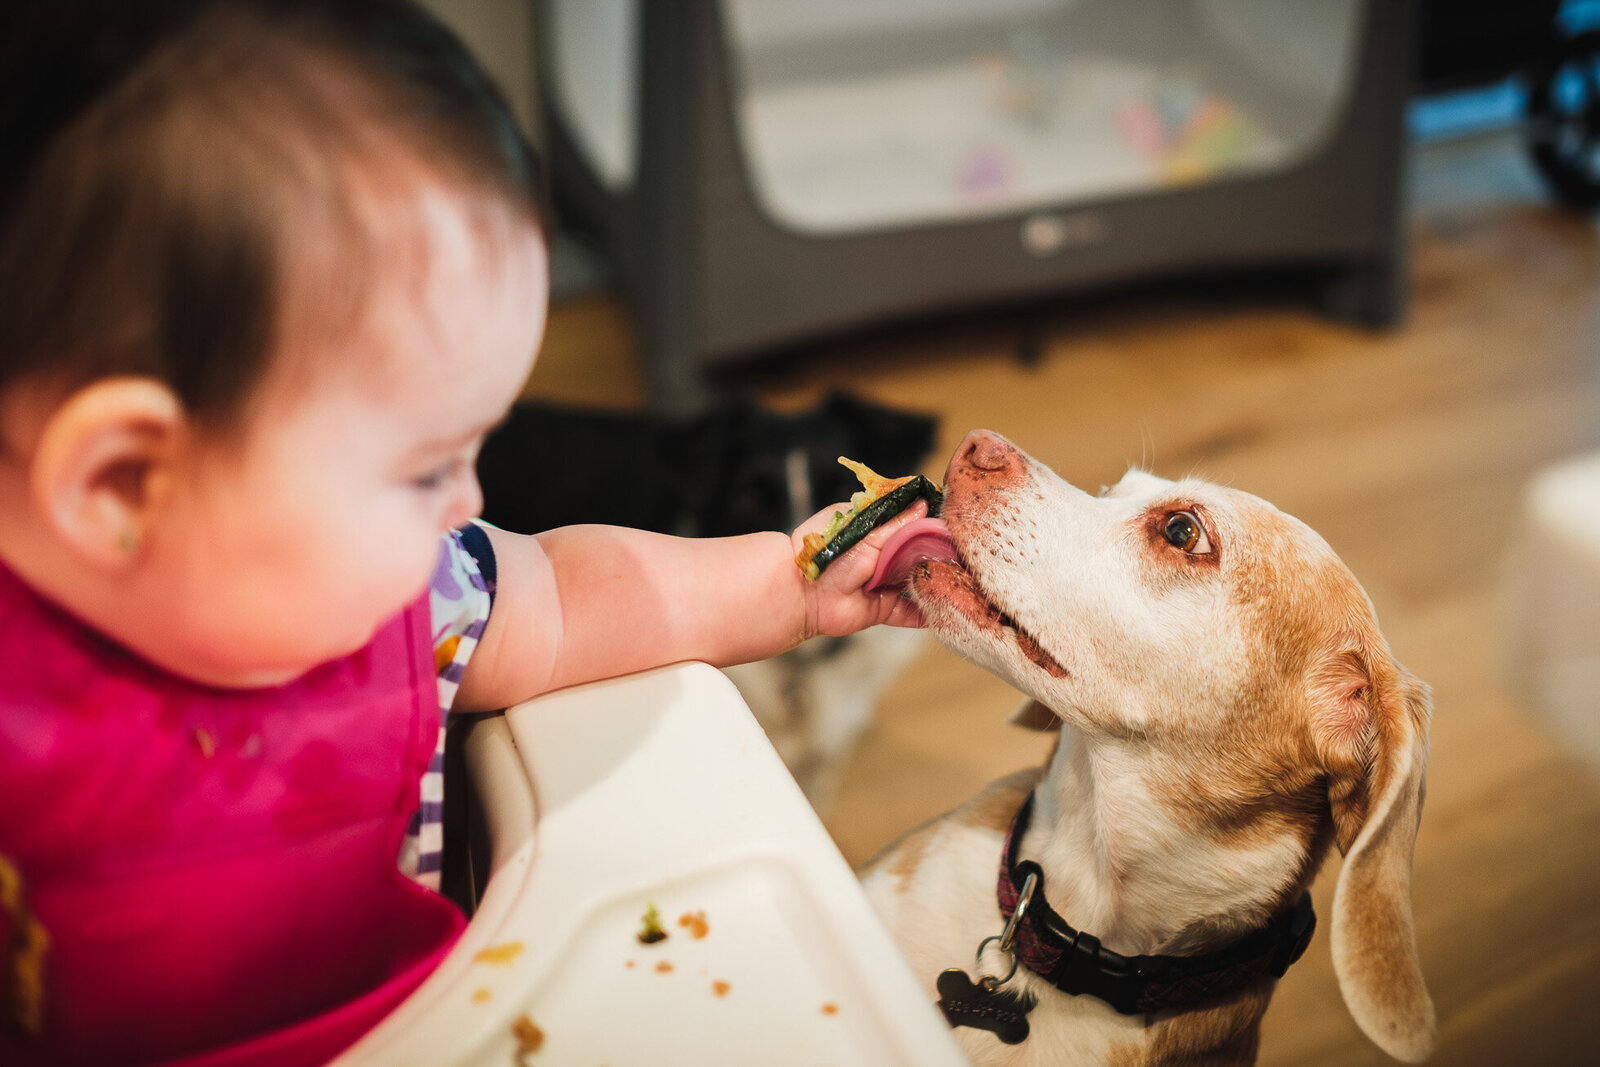 baby feeds her dog a piece of zucchini